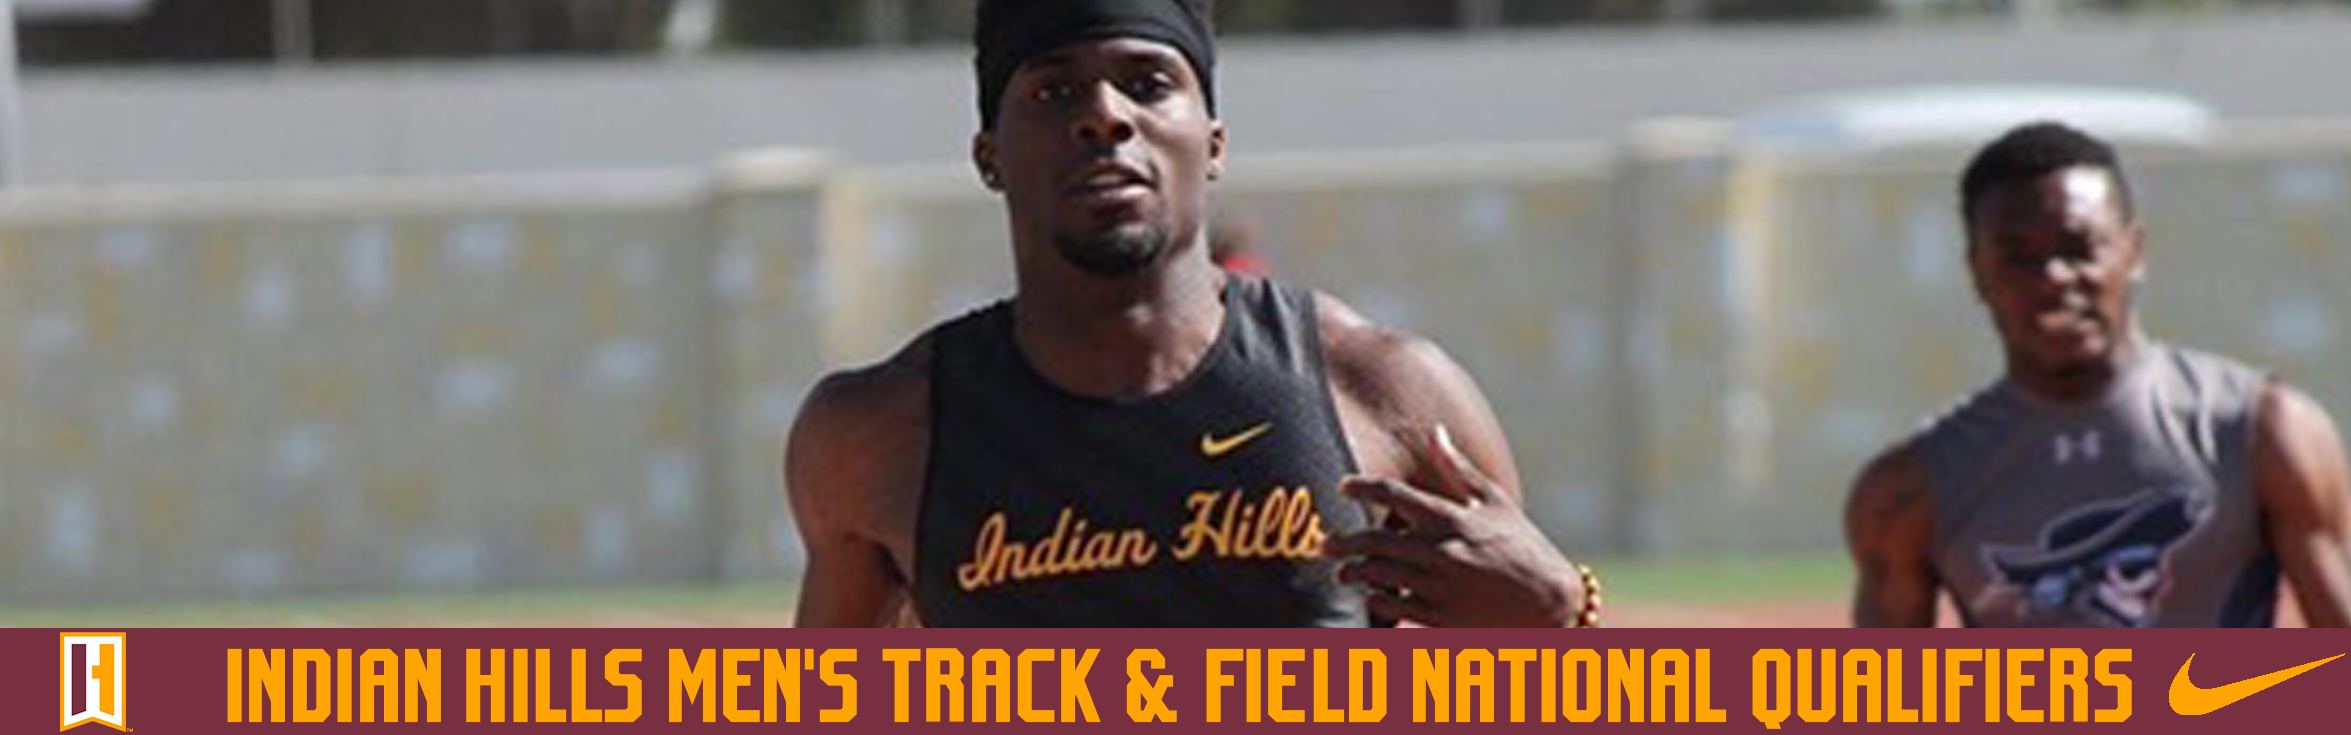 INDIAN HILLS MEN'S TRACK & FIELD NATIONAL QUALIFIERS